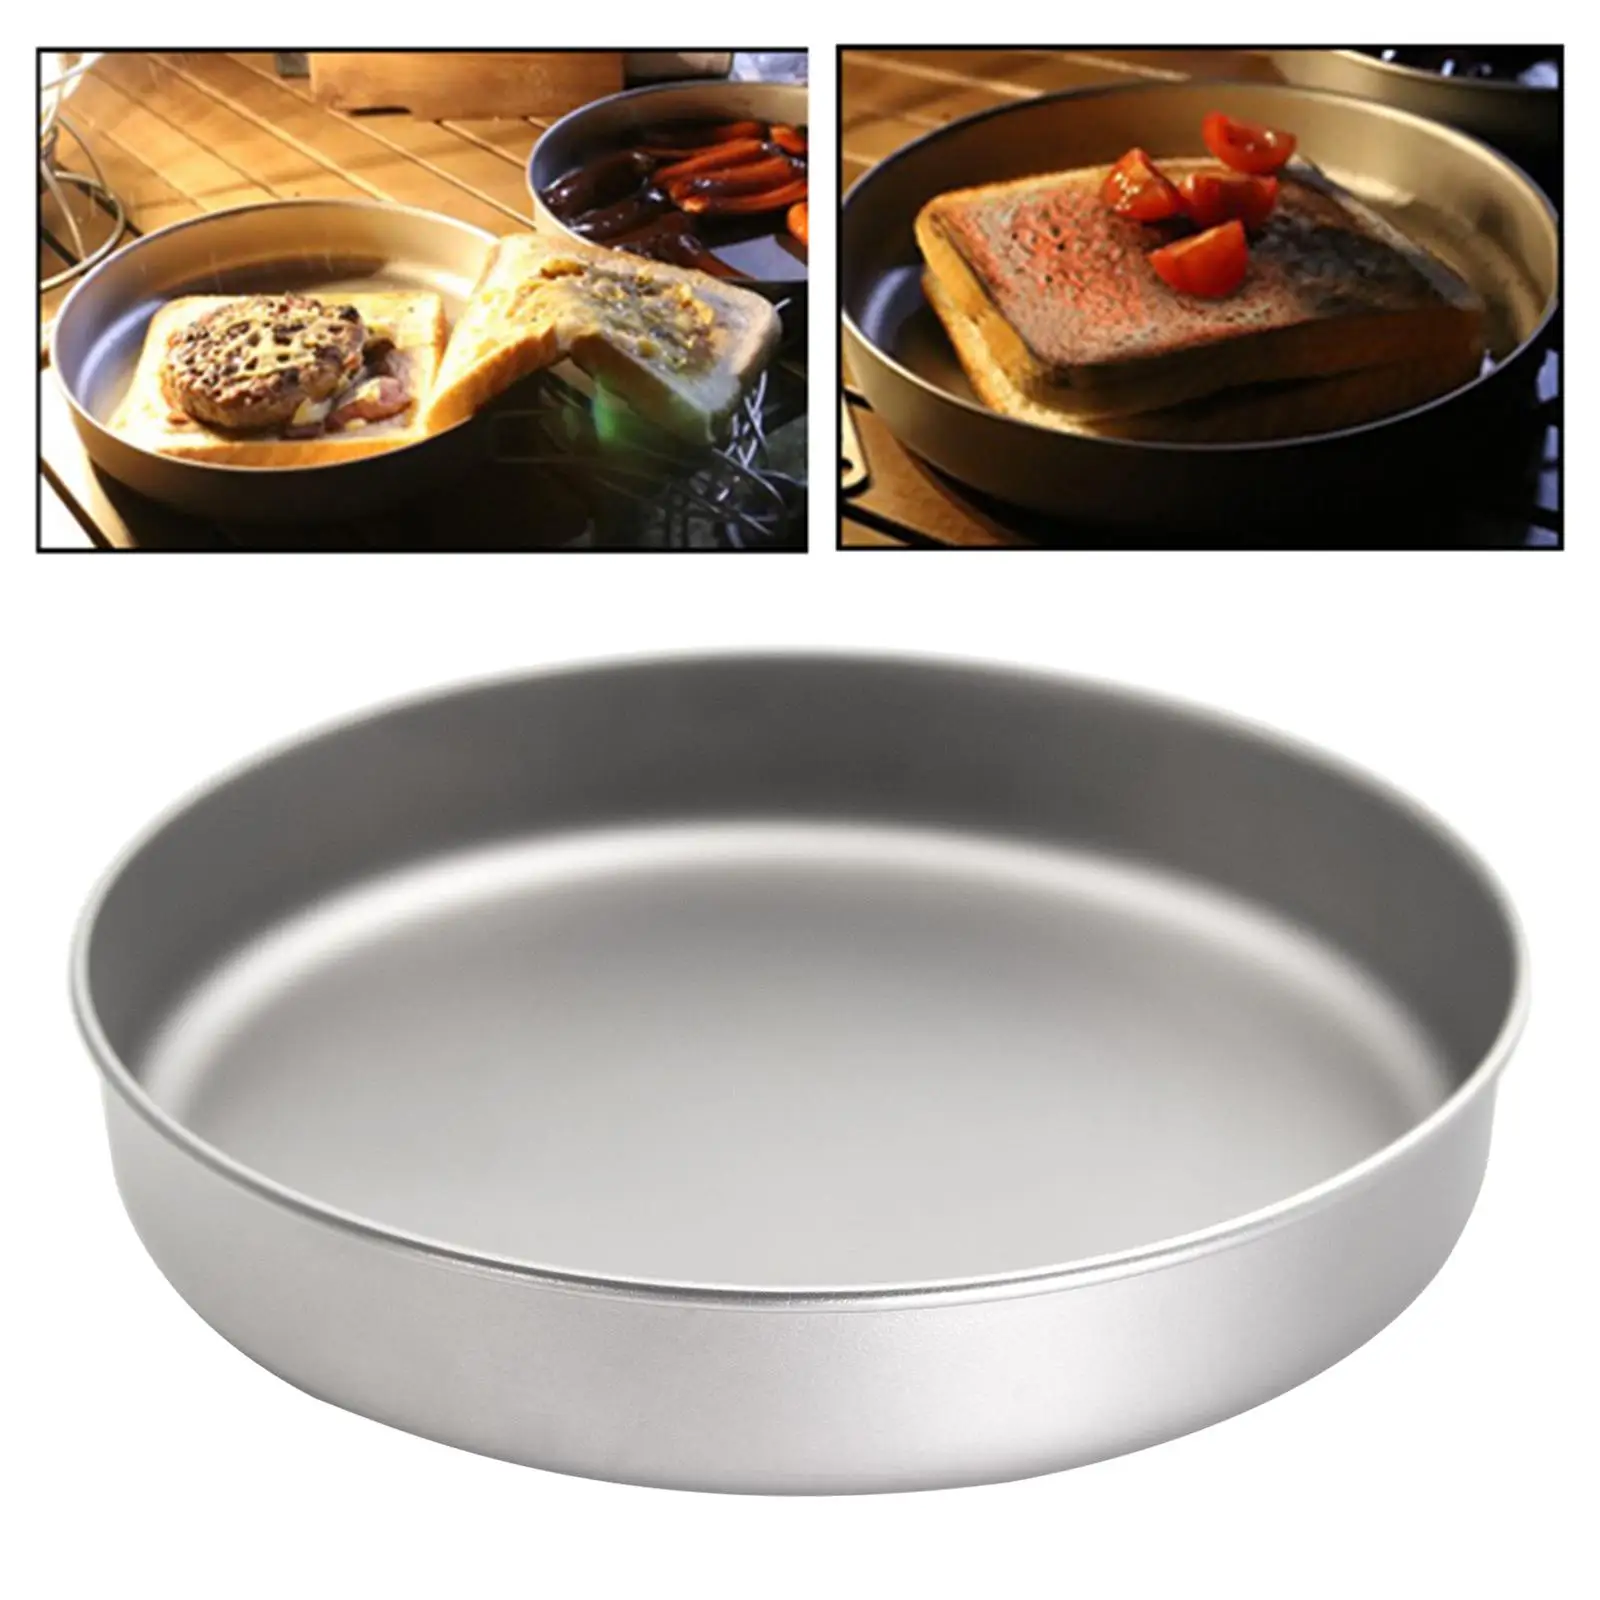 Titanium Pan Camping Cookware Ultralight Plate Dish Tableware Bowl Fry Pan for Home Outdoor Cooking Backpacking Hiking Camping